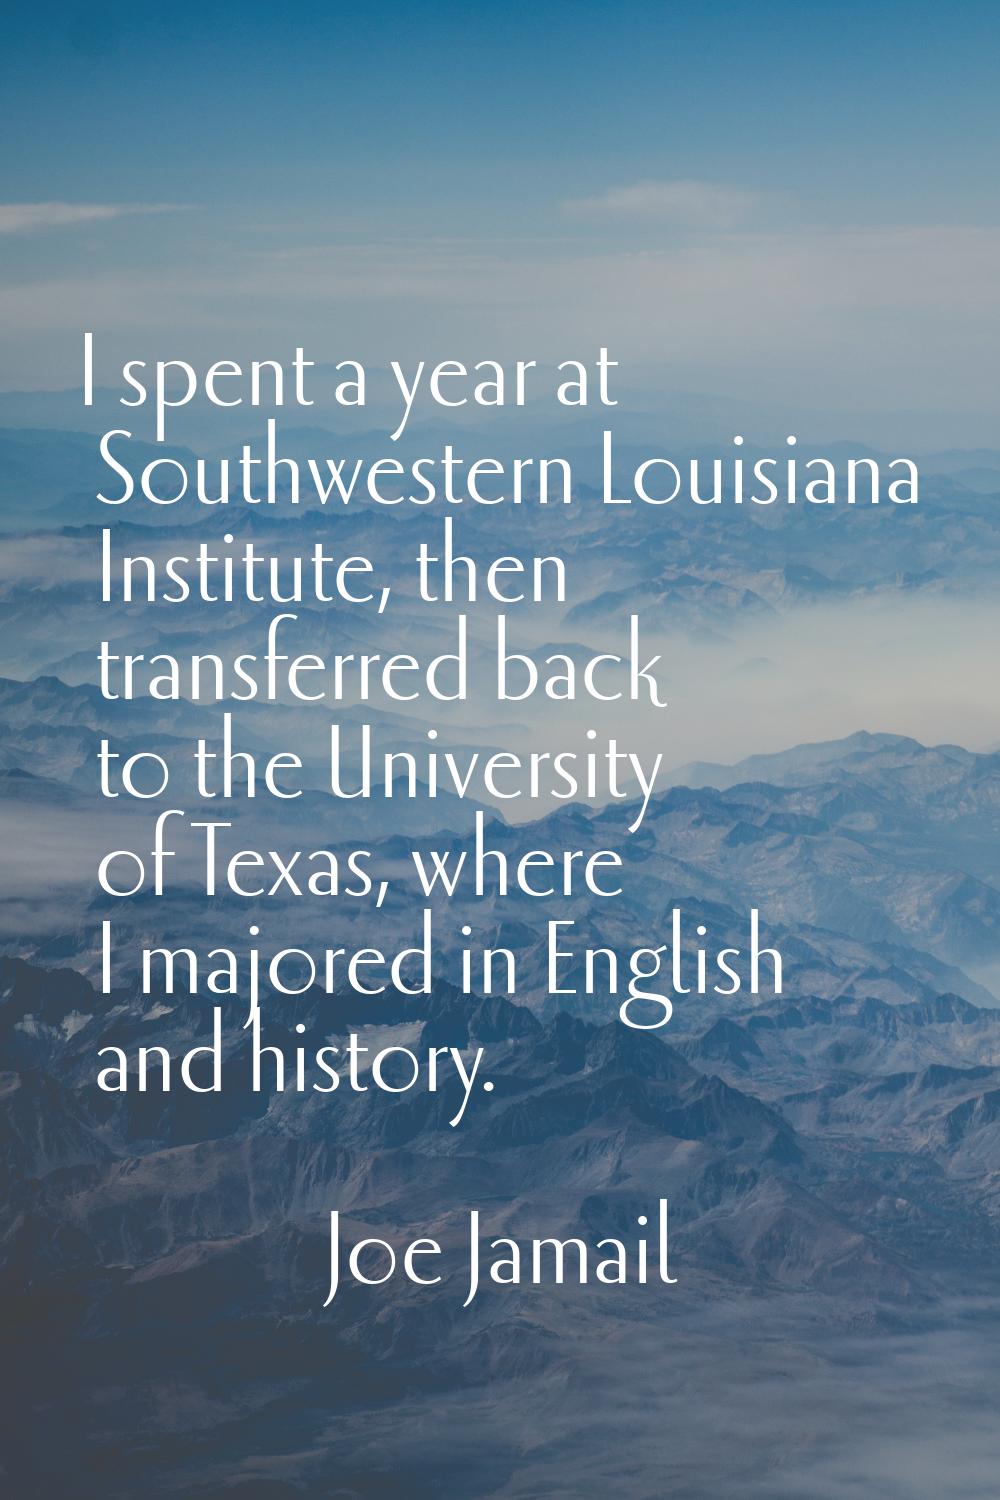 I spent a year at Southwestern Louisiana Institute, then transferred back to the University of Texa